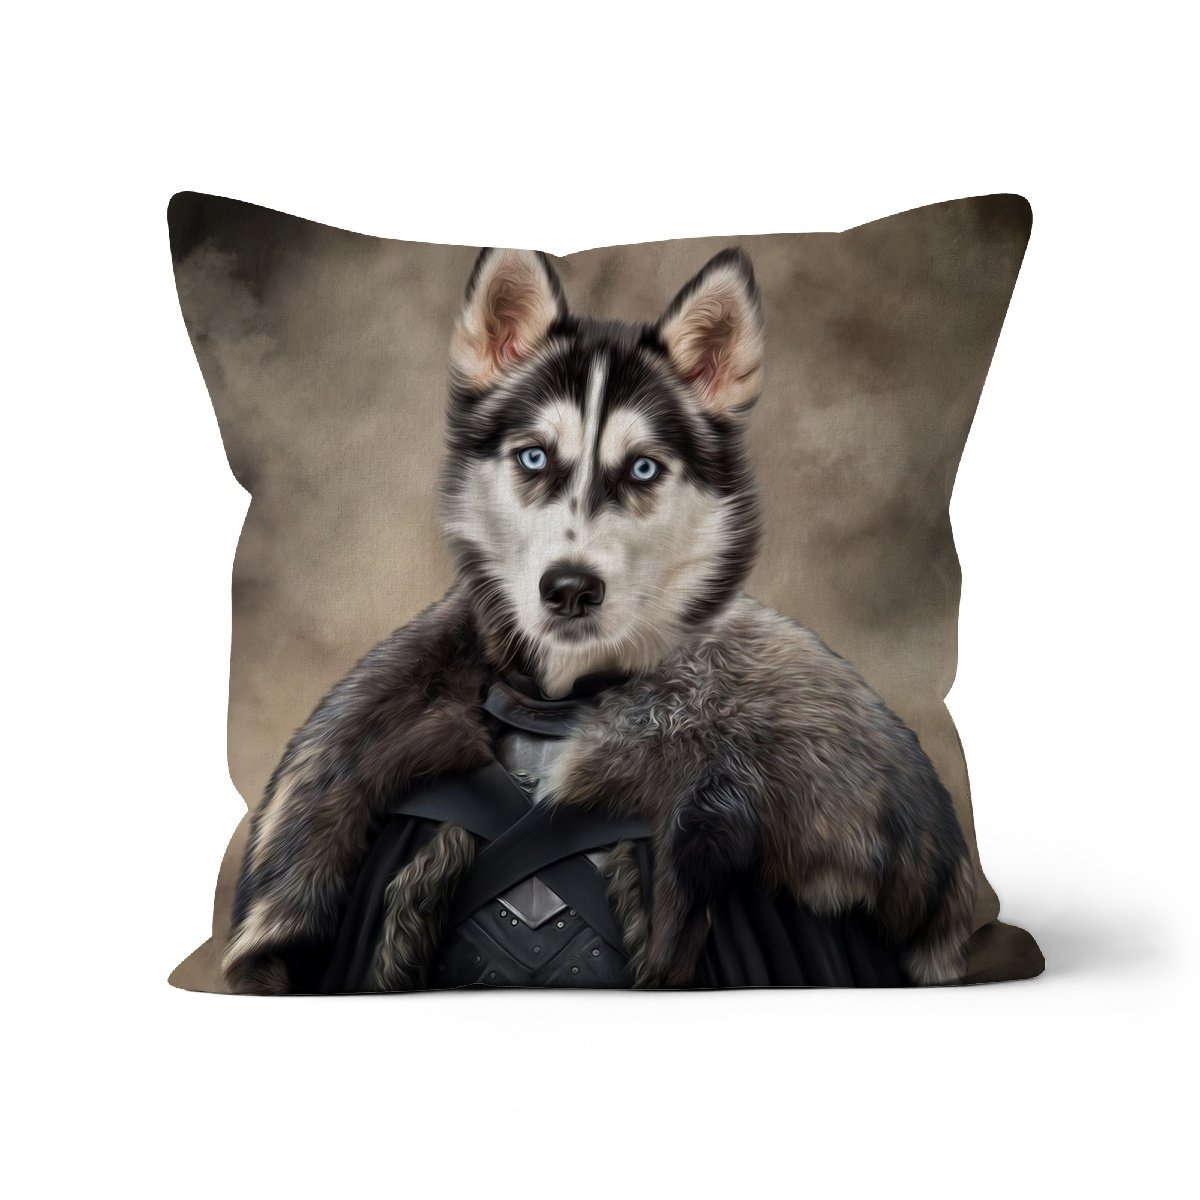 The Iron King (GOT Inspired): Custom Pet Throw Pillow - Paw & Glory - #pet portraits# - #dog portraits# - #pet portraits uk#paw and glory, custom pet portrait cushion,dog pillows personalized, pet face pillows, dog photo on pillow, custom cat pillows, pillow with pet picture